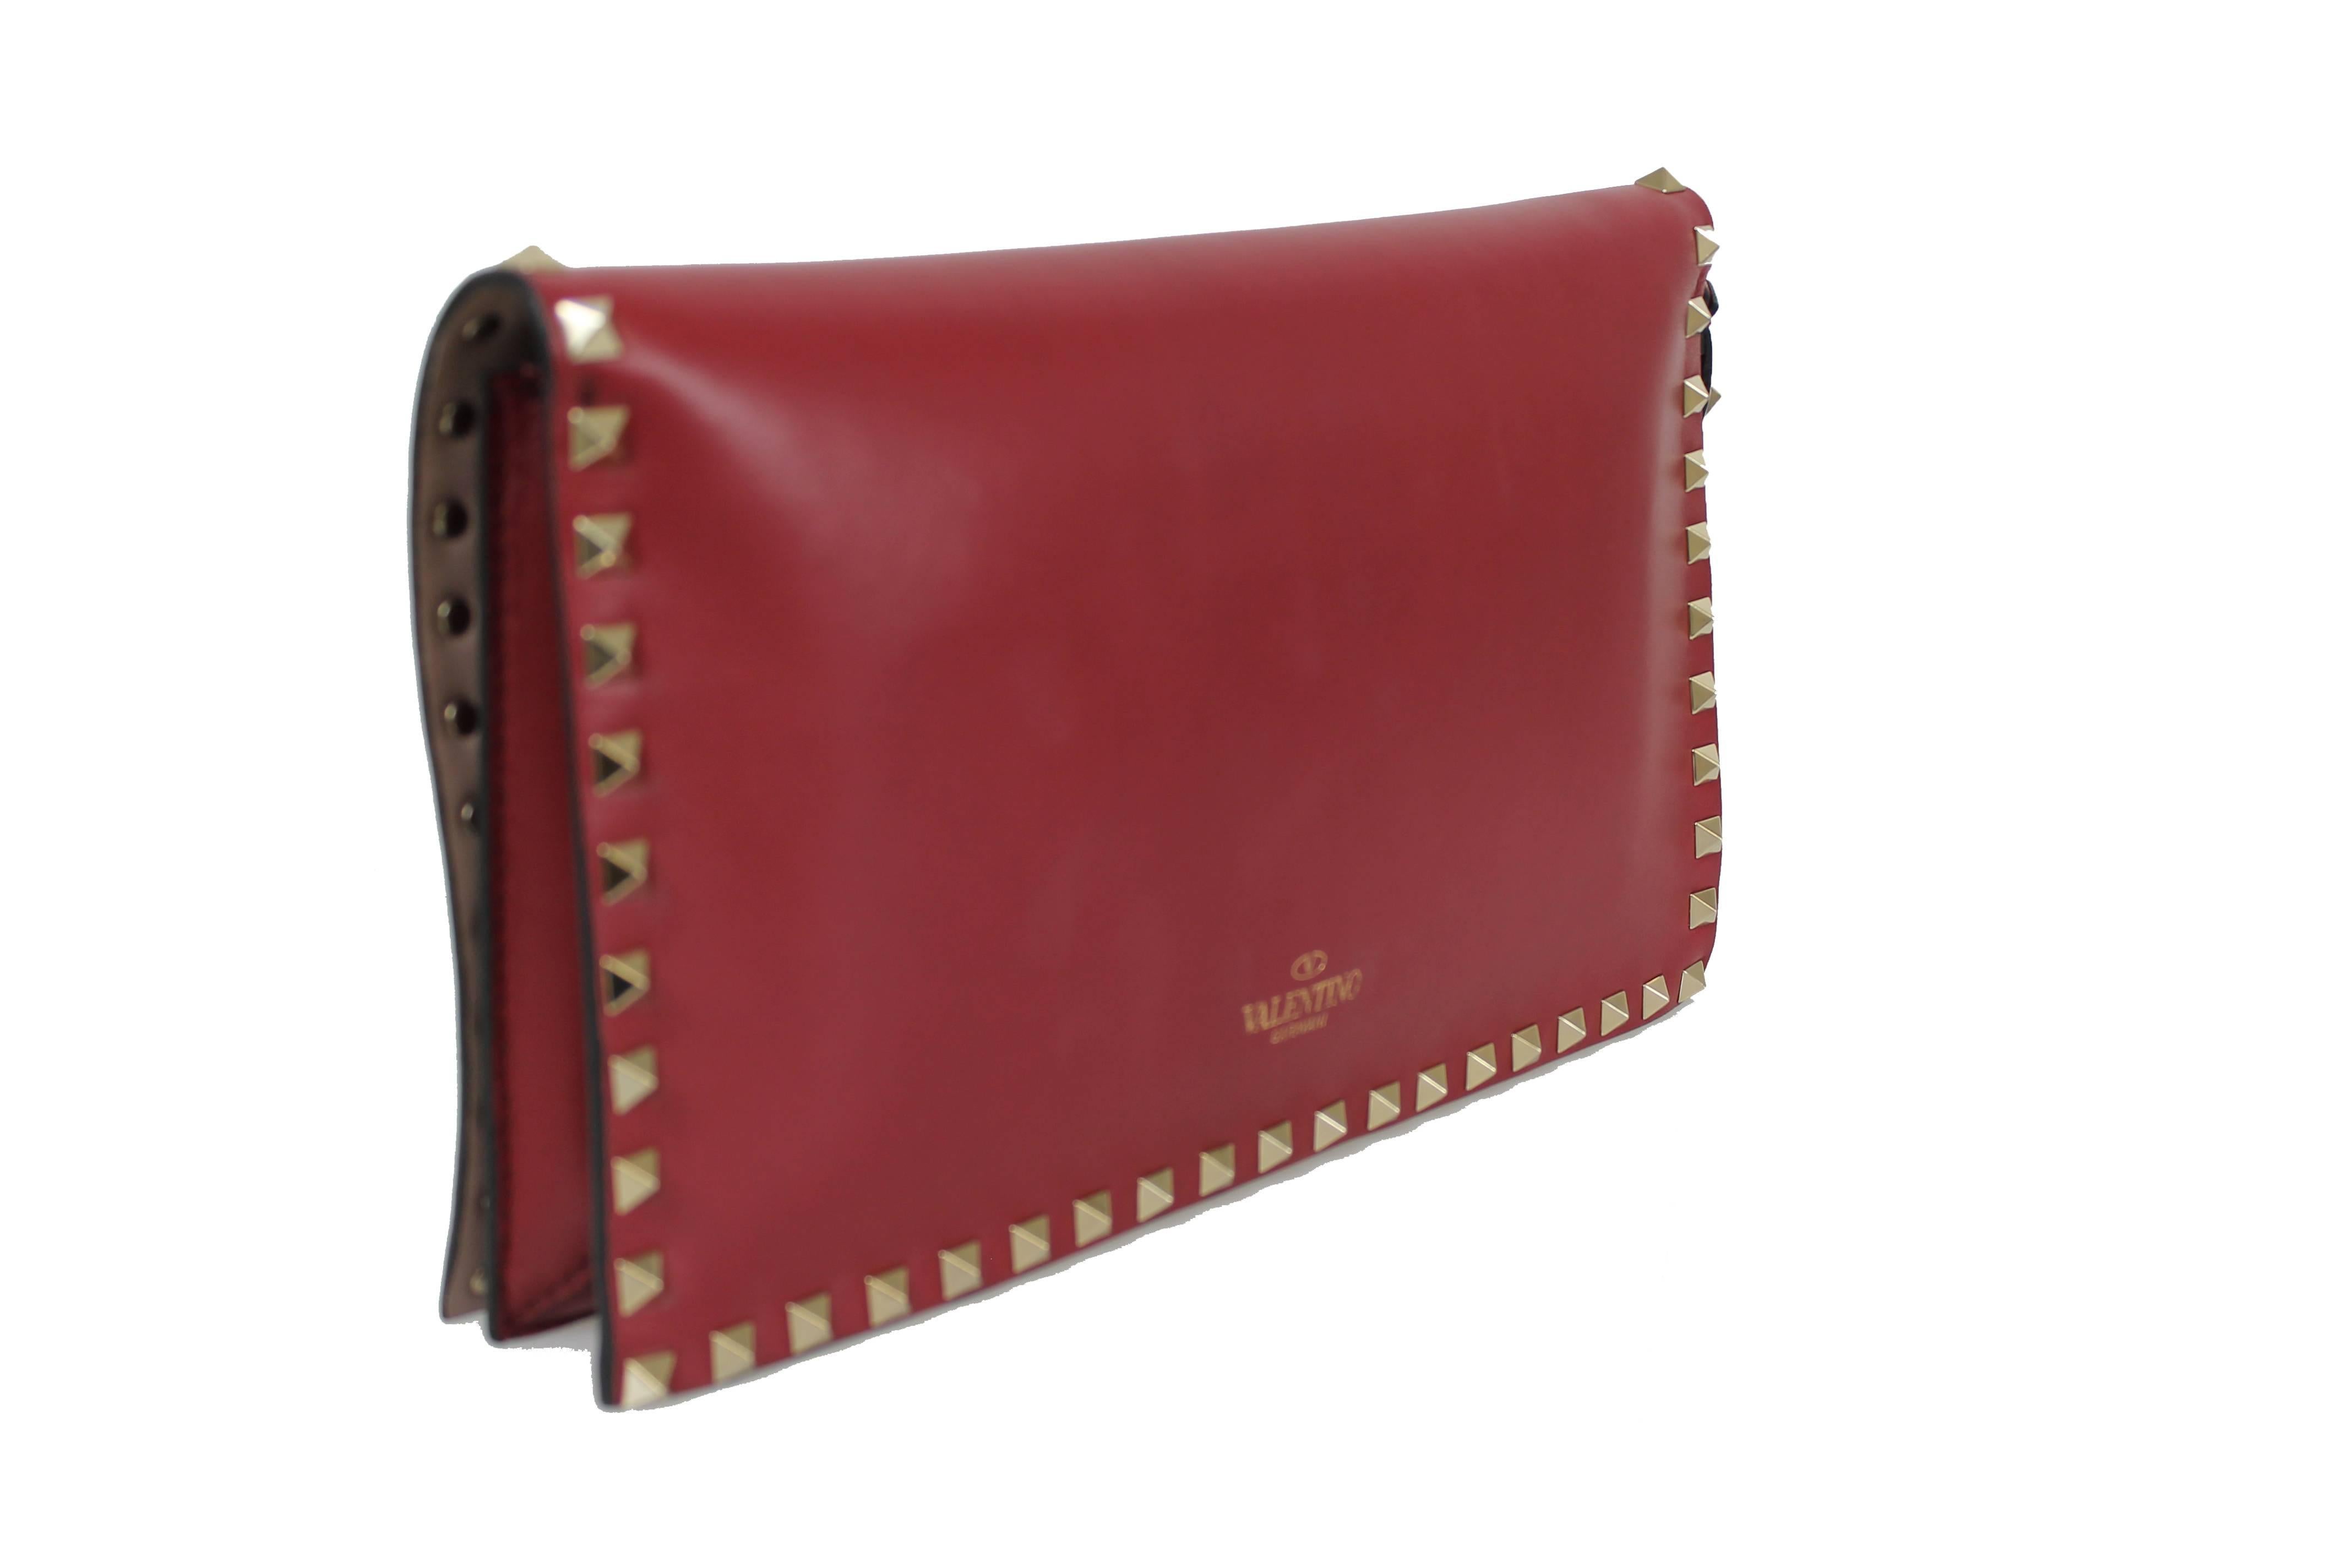 Valentino Red Rockstud Clutch Bag

Genuine leather outer and lining with gold-tone hardware
Made in Italy
Measures approx 11.4